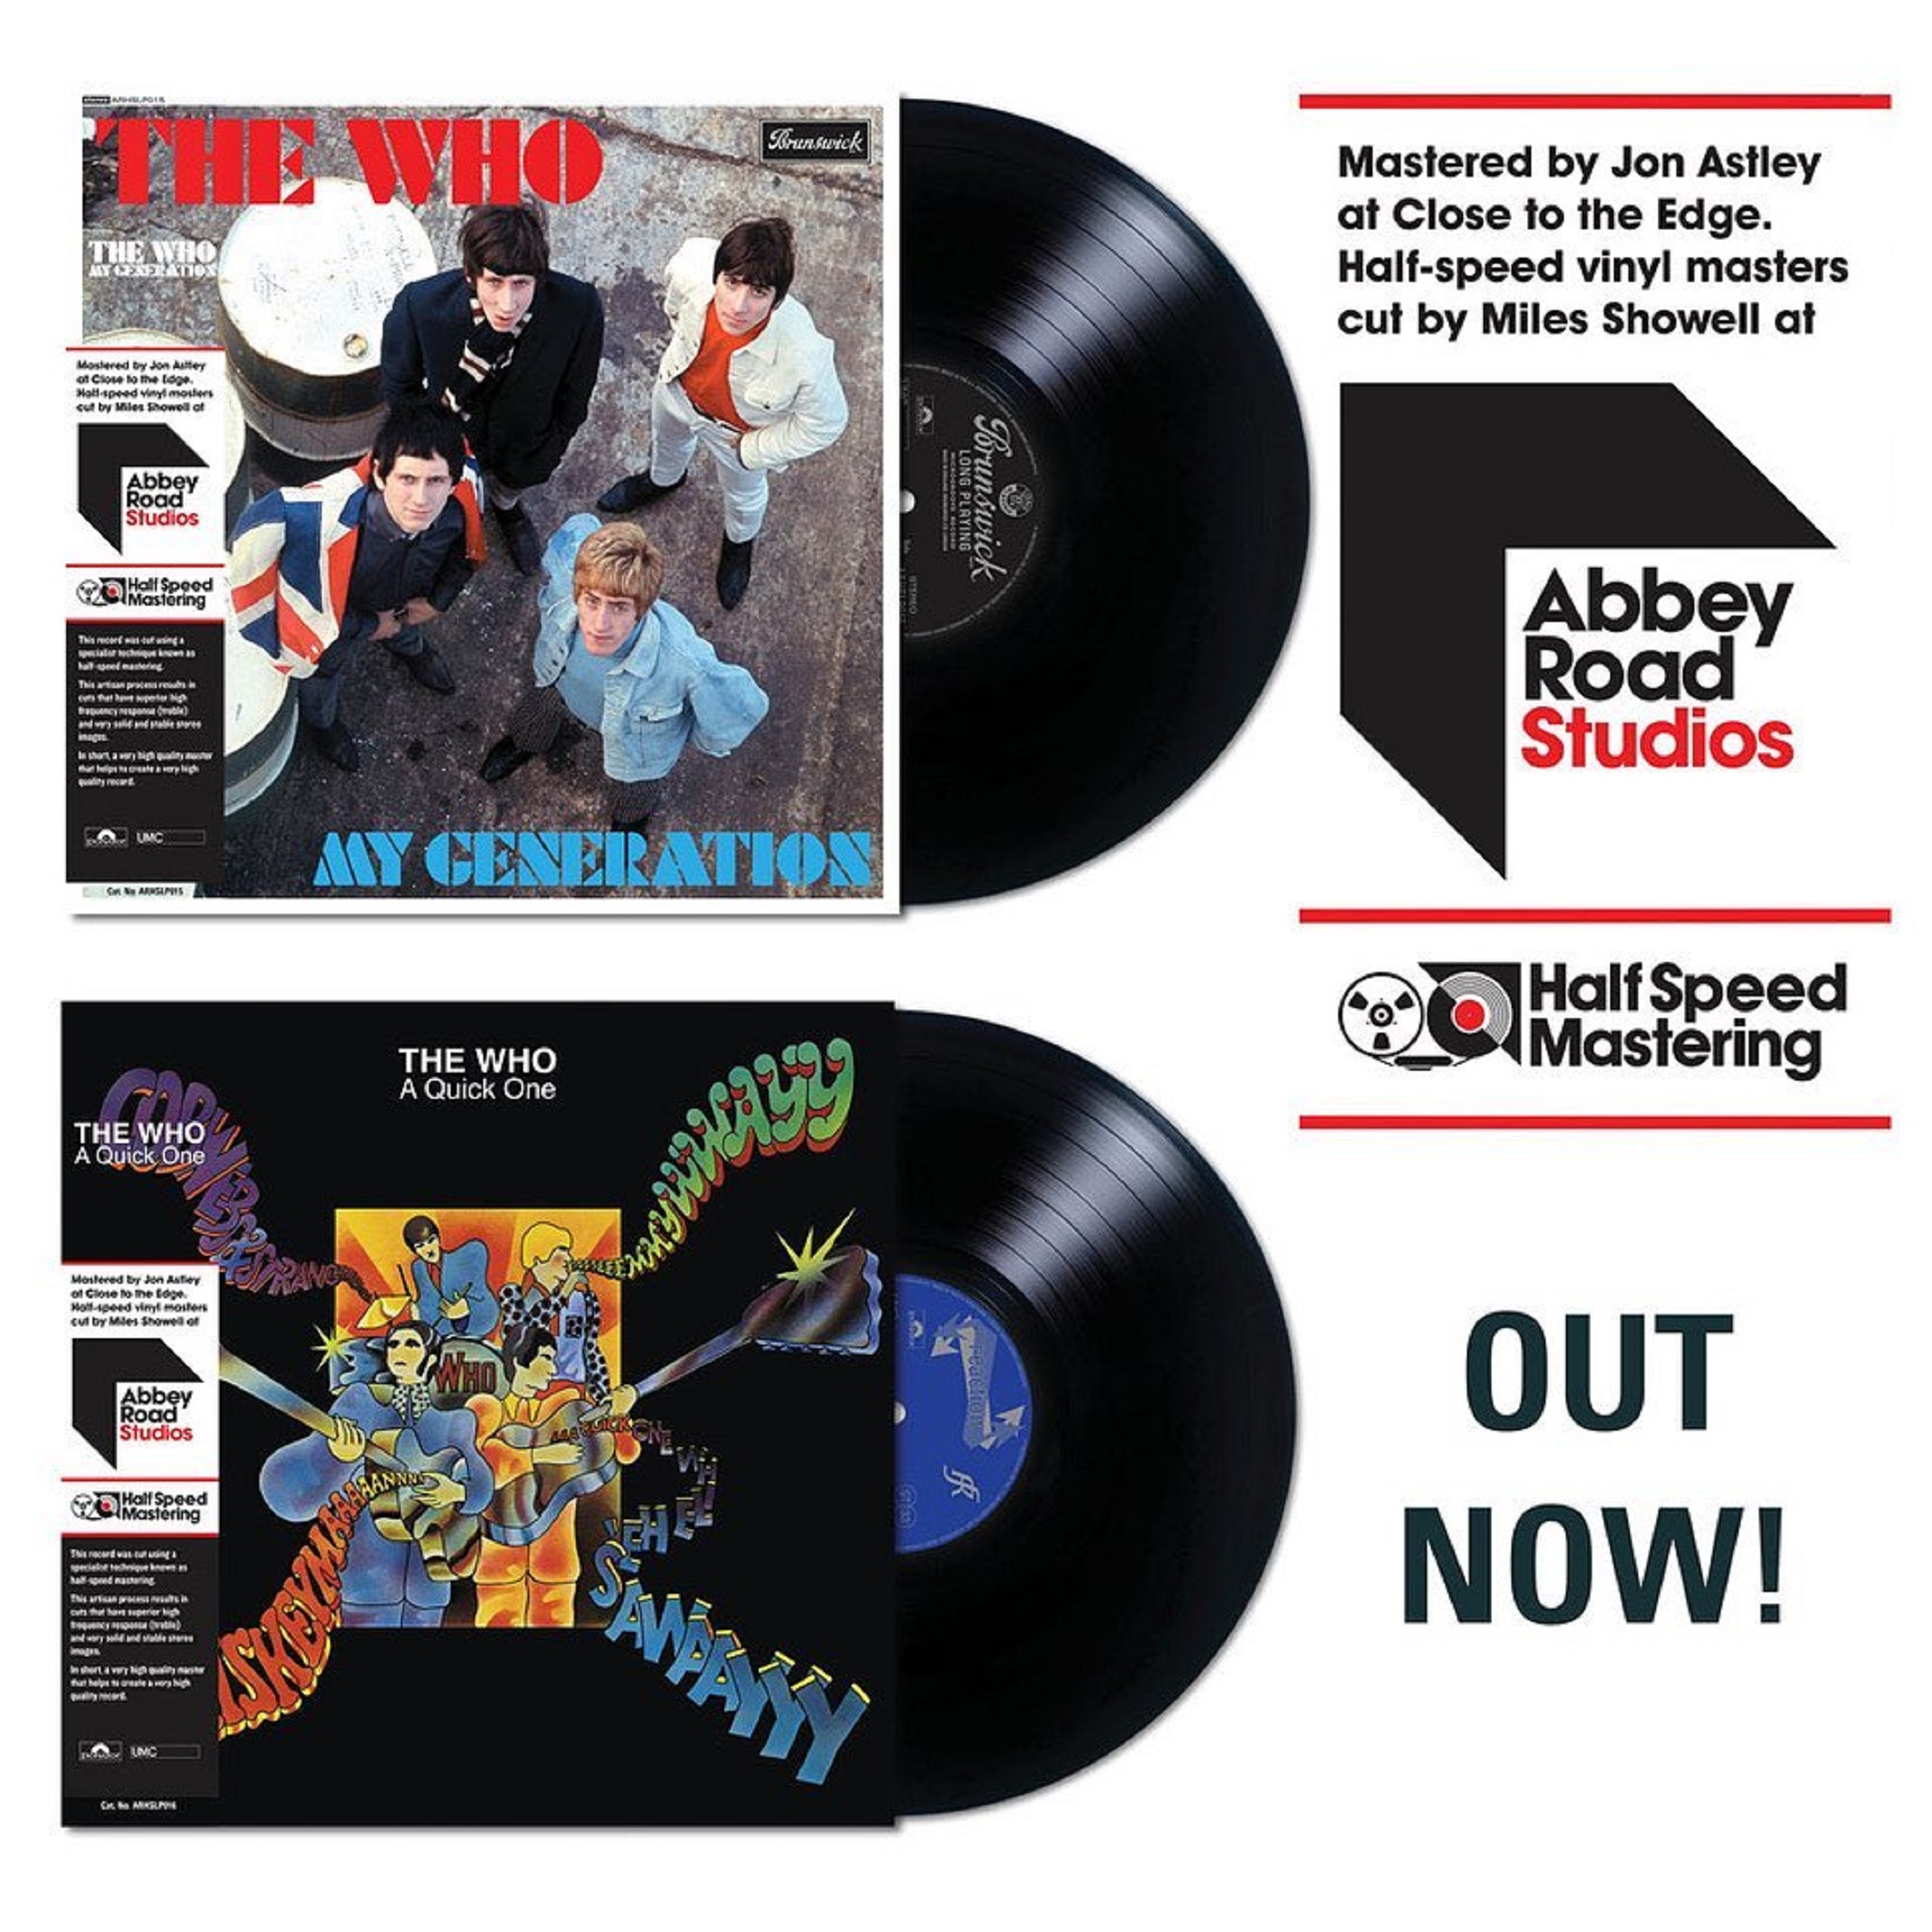 THE WHO - TWO BRAND NEW LIMITED EDITION HALF SPEED MASTERED ALBUMS 'MY GENERATION' & 'A QUICK ONE' AVAILABLE NOW